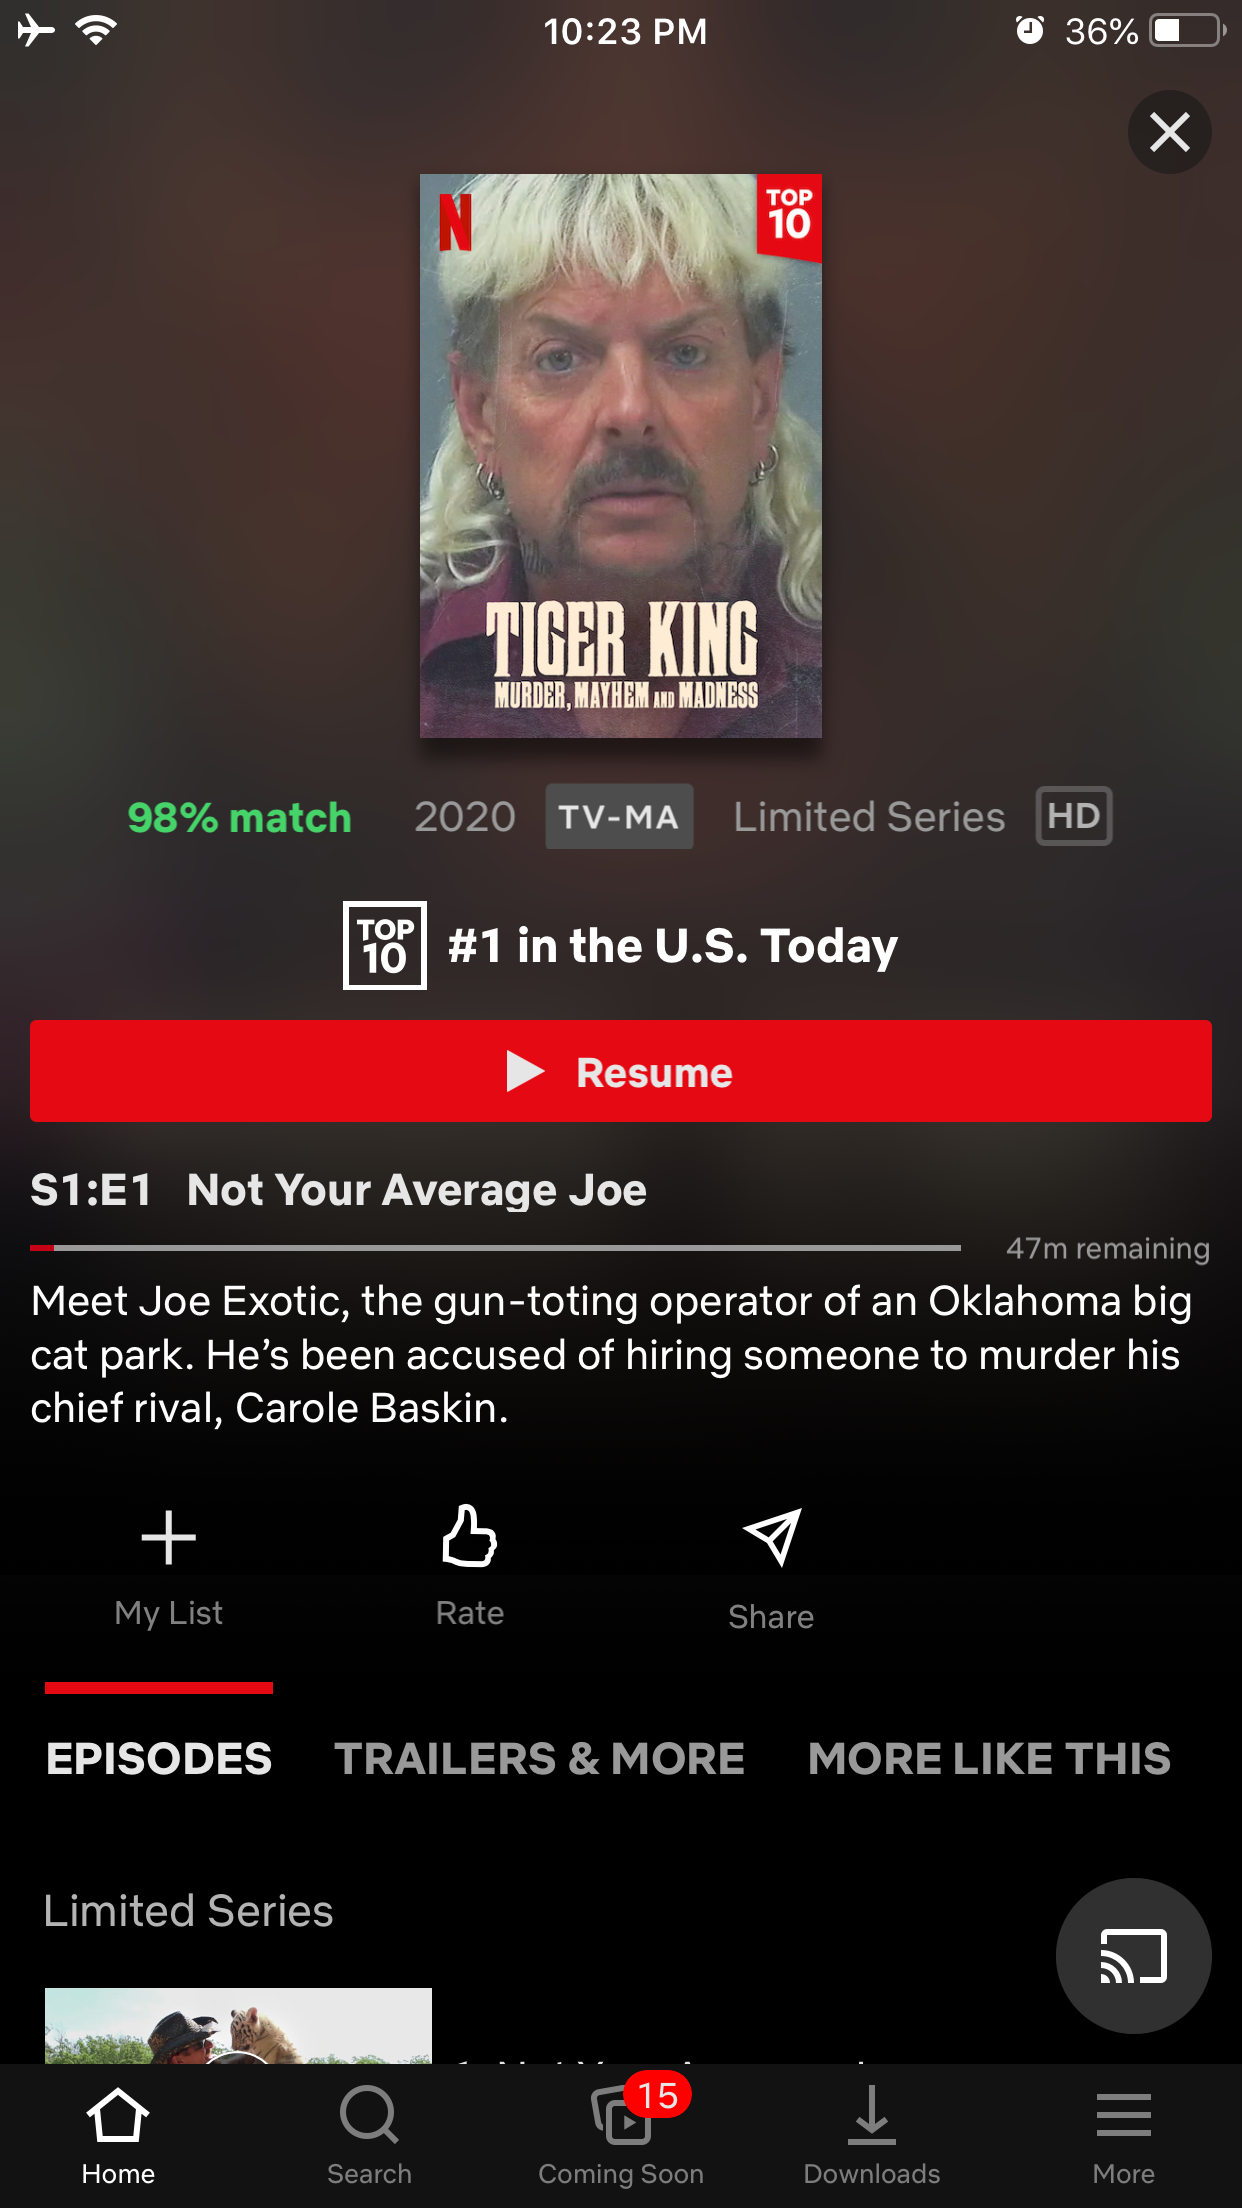 screenshot - 36% Tiger King Kierniin. 98% match 2020 TvMa Limited Series Hd 18 in the U.S. Today Resume S1E1 Not Your Average Joe 47m remaining Meet Joe Exotic, the guntoting operator of an Oklahoma big cat park. He's been accused of hiring someone to mur